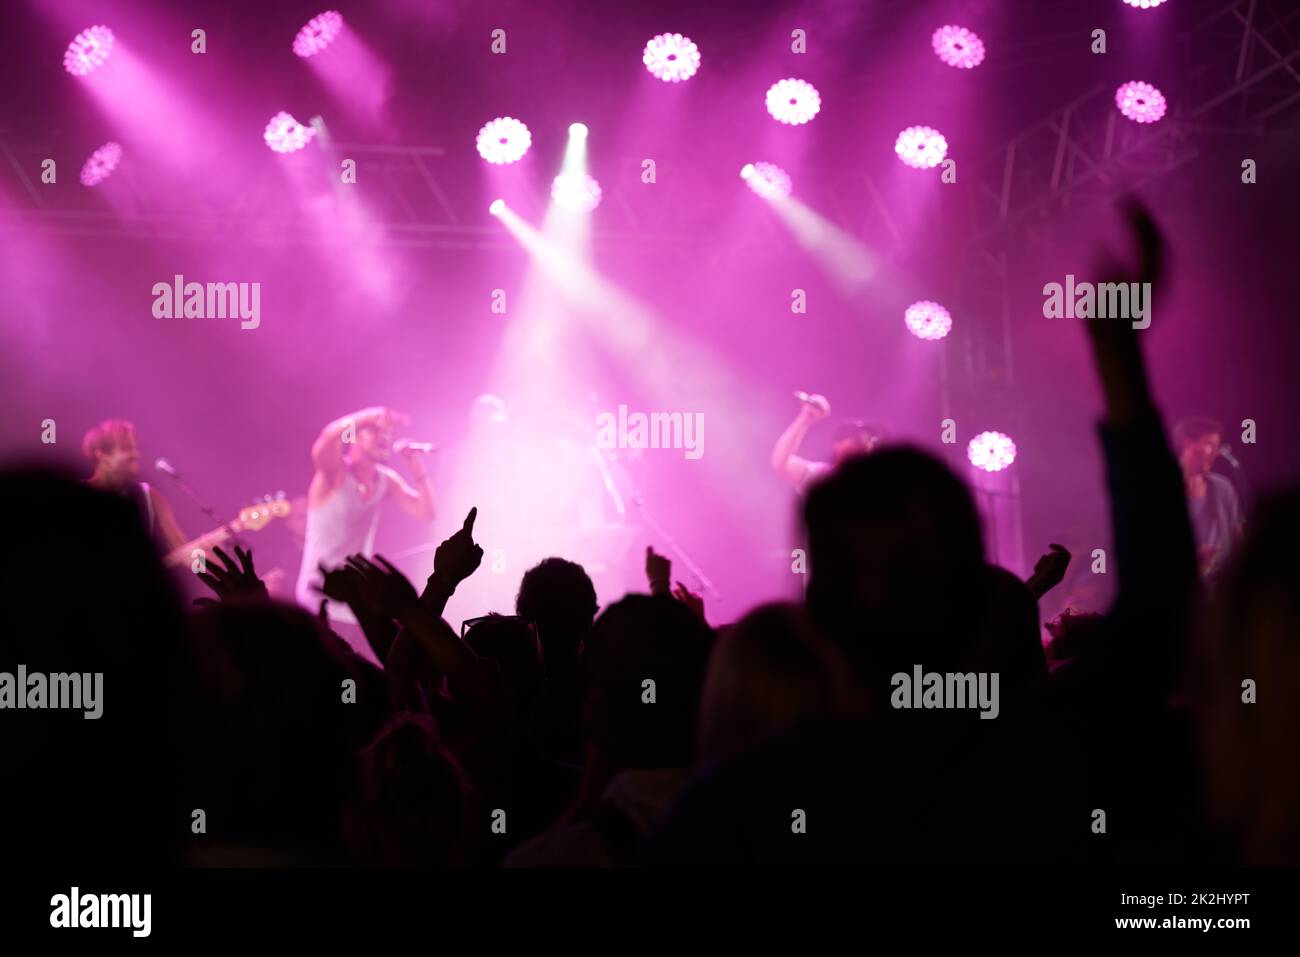 A night they'll never forget. Rearview of an audience with hands raised at a music festival and lights streaming down from above the stage. Stock Photo